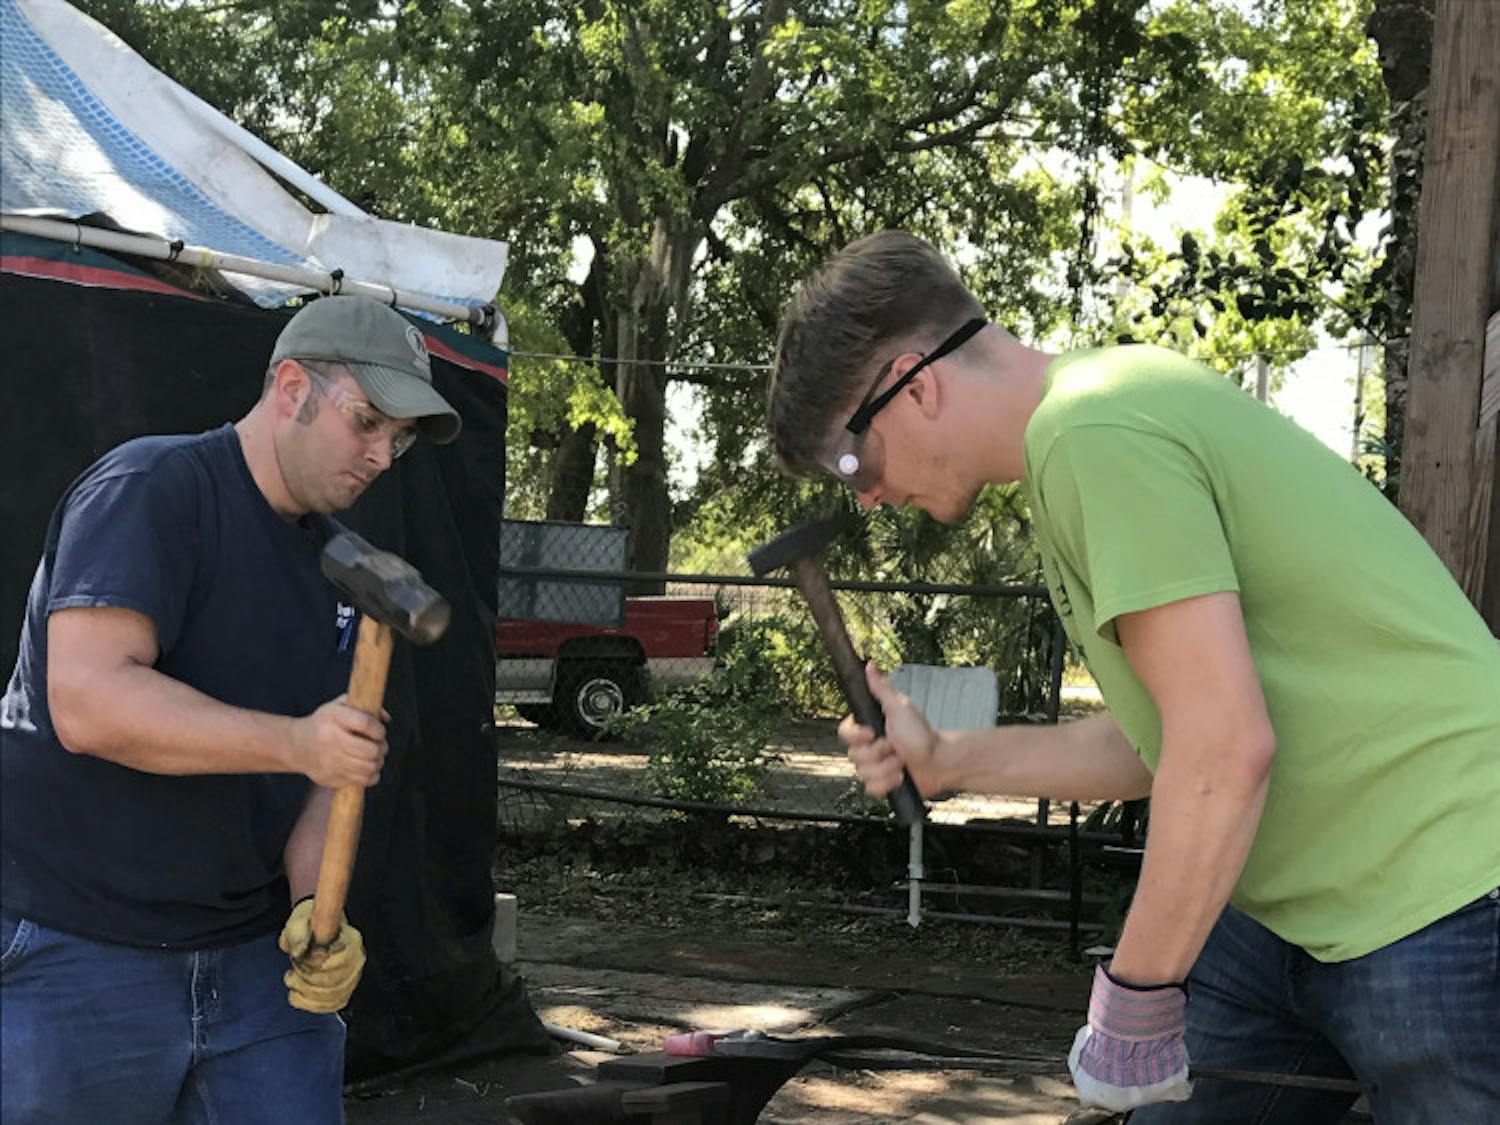 Thirty-one-year-old John Carter (left) and 26-year-old Martin Kipp team up to mold their mall pein hammer into an axe using a technique called forging.